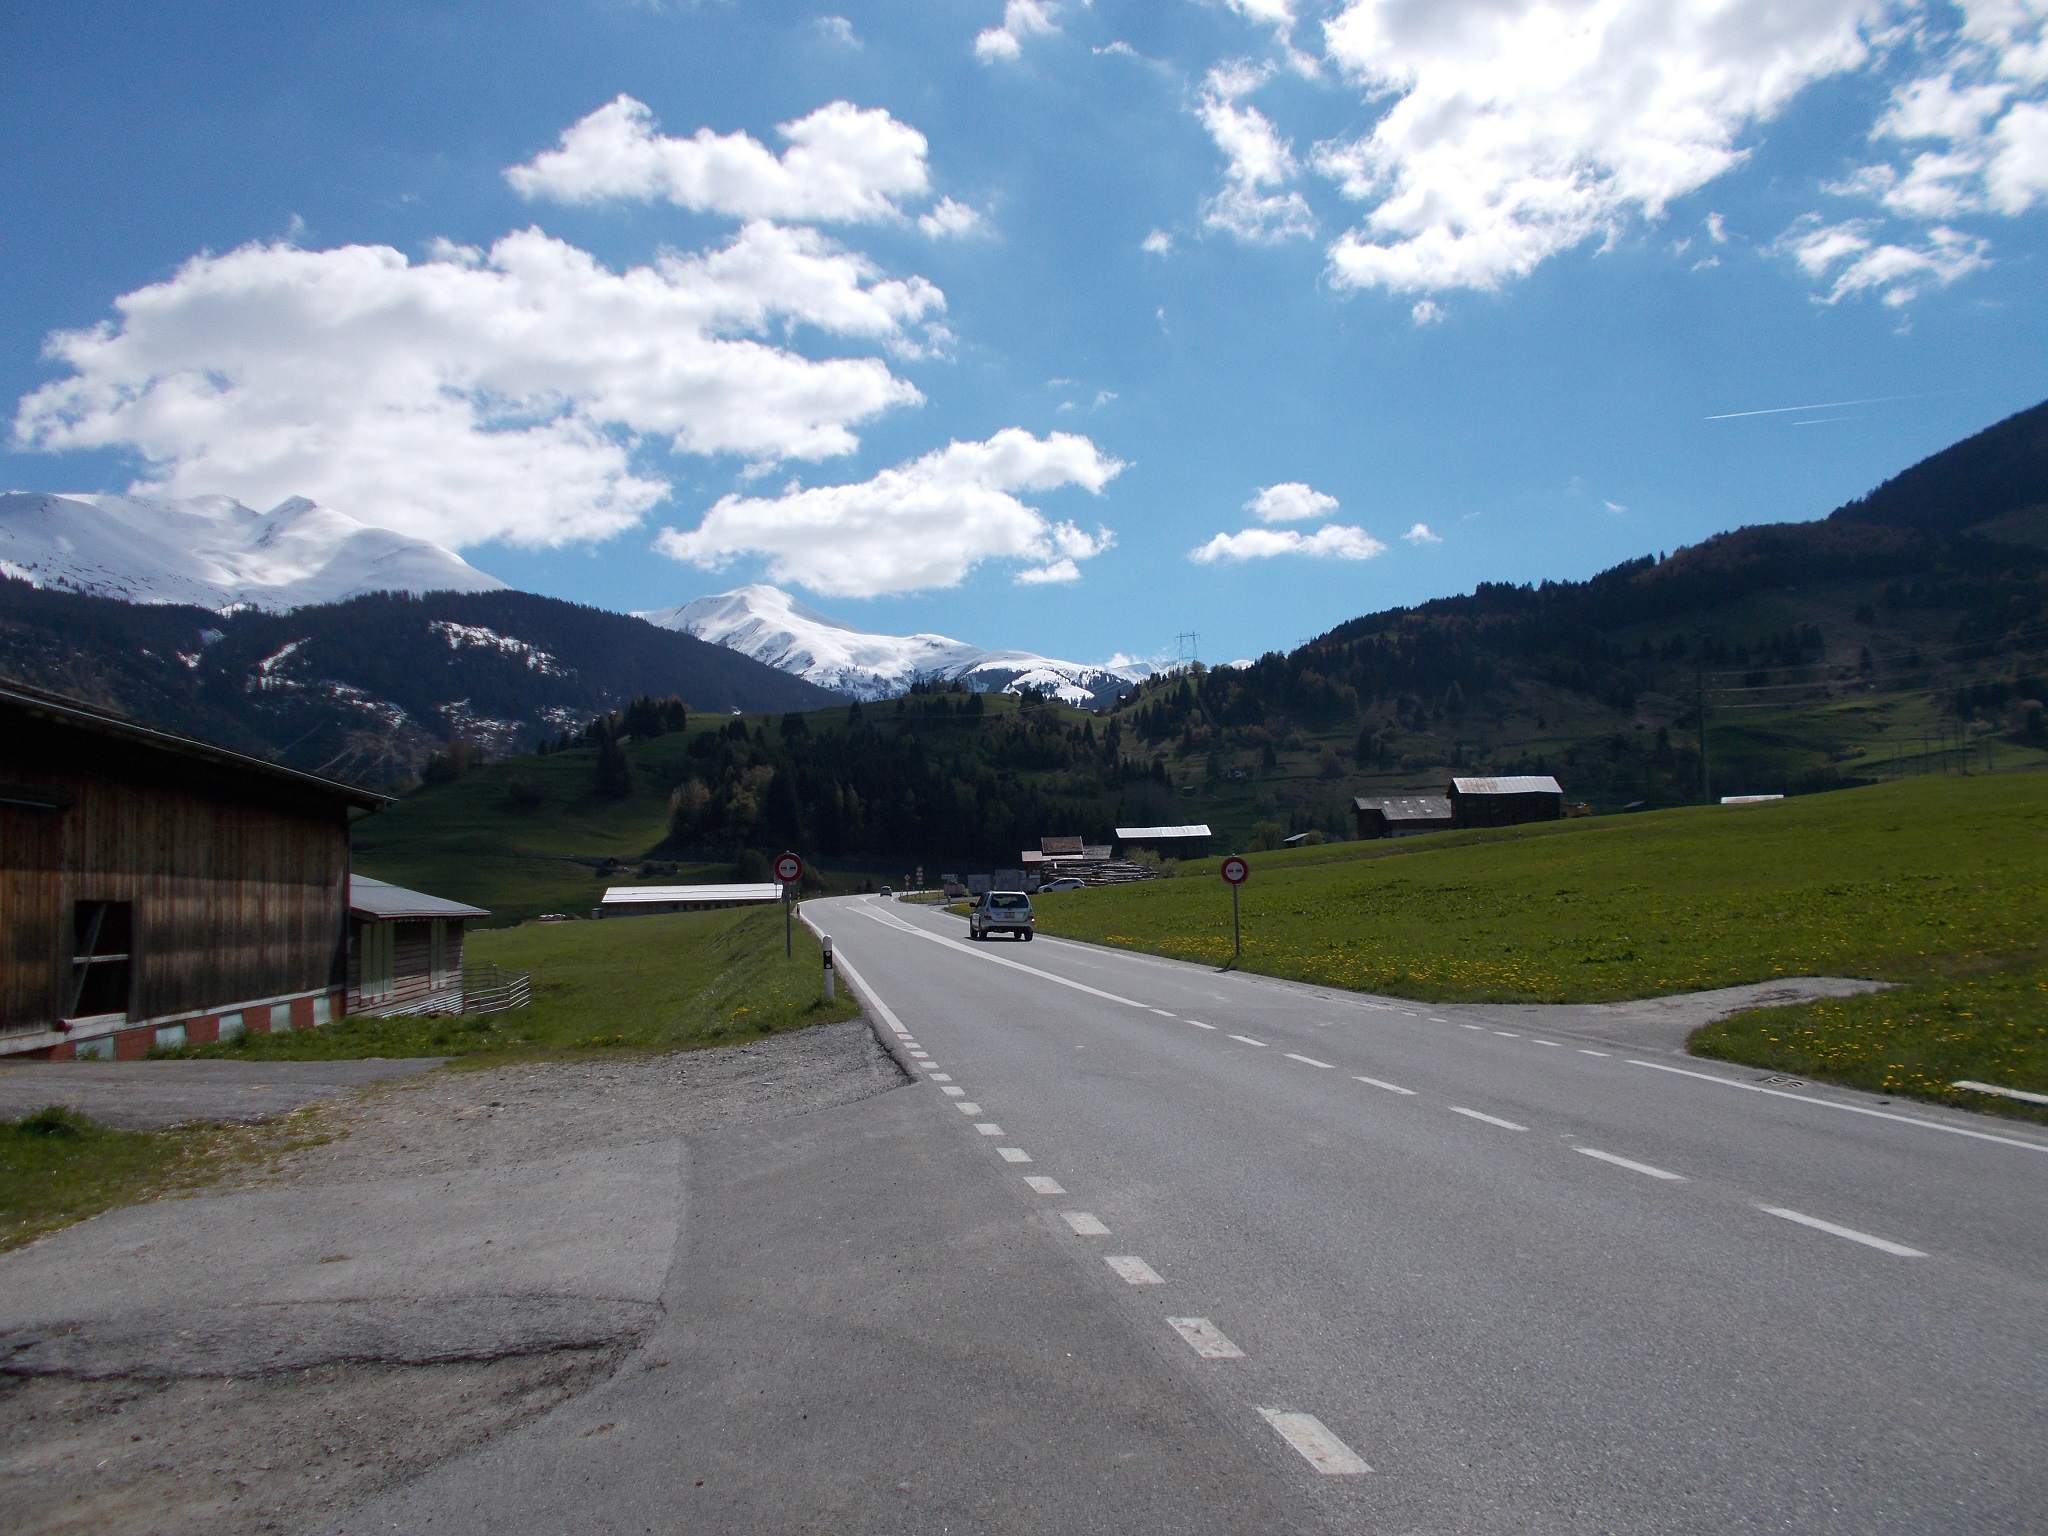 Scenic shot looking up a roadway in the Swiss mountains.